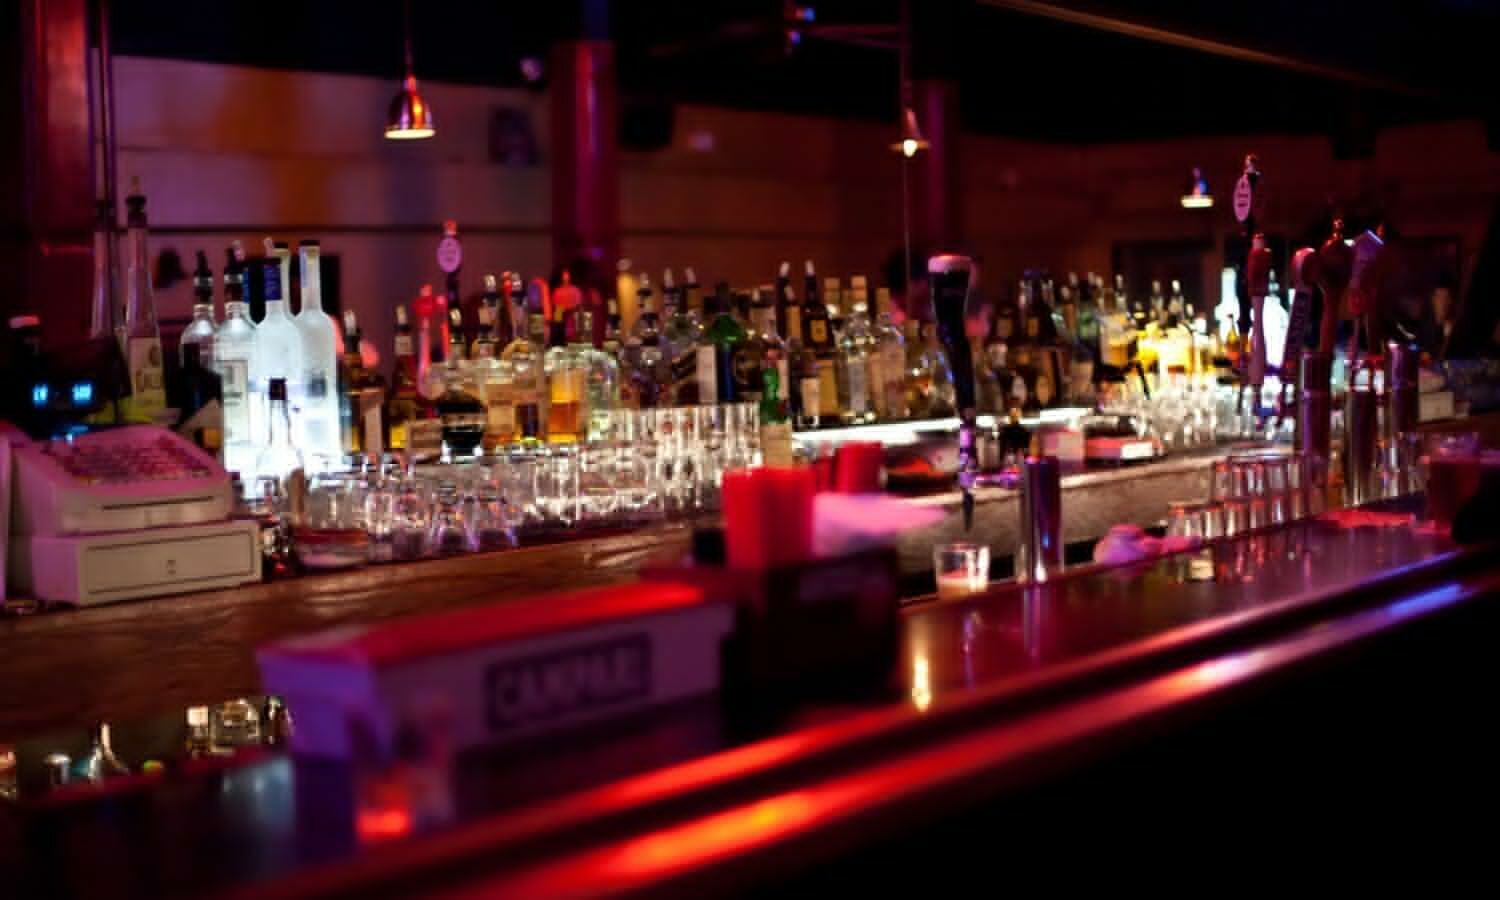 Famous Bars in Delhi: These are the best bars to spend quality time in Delhi, you will not know when the hours of sitting alone will pass.